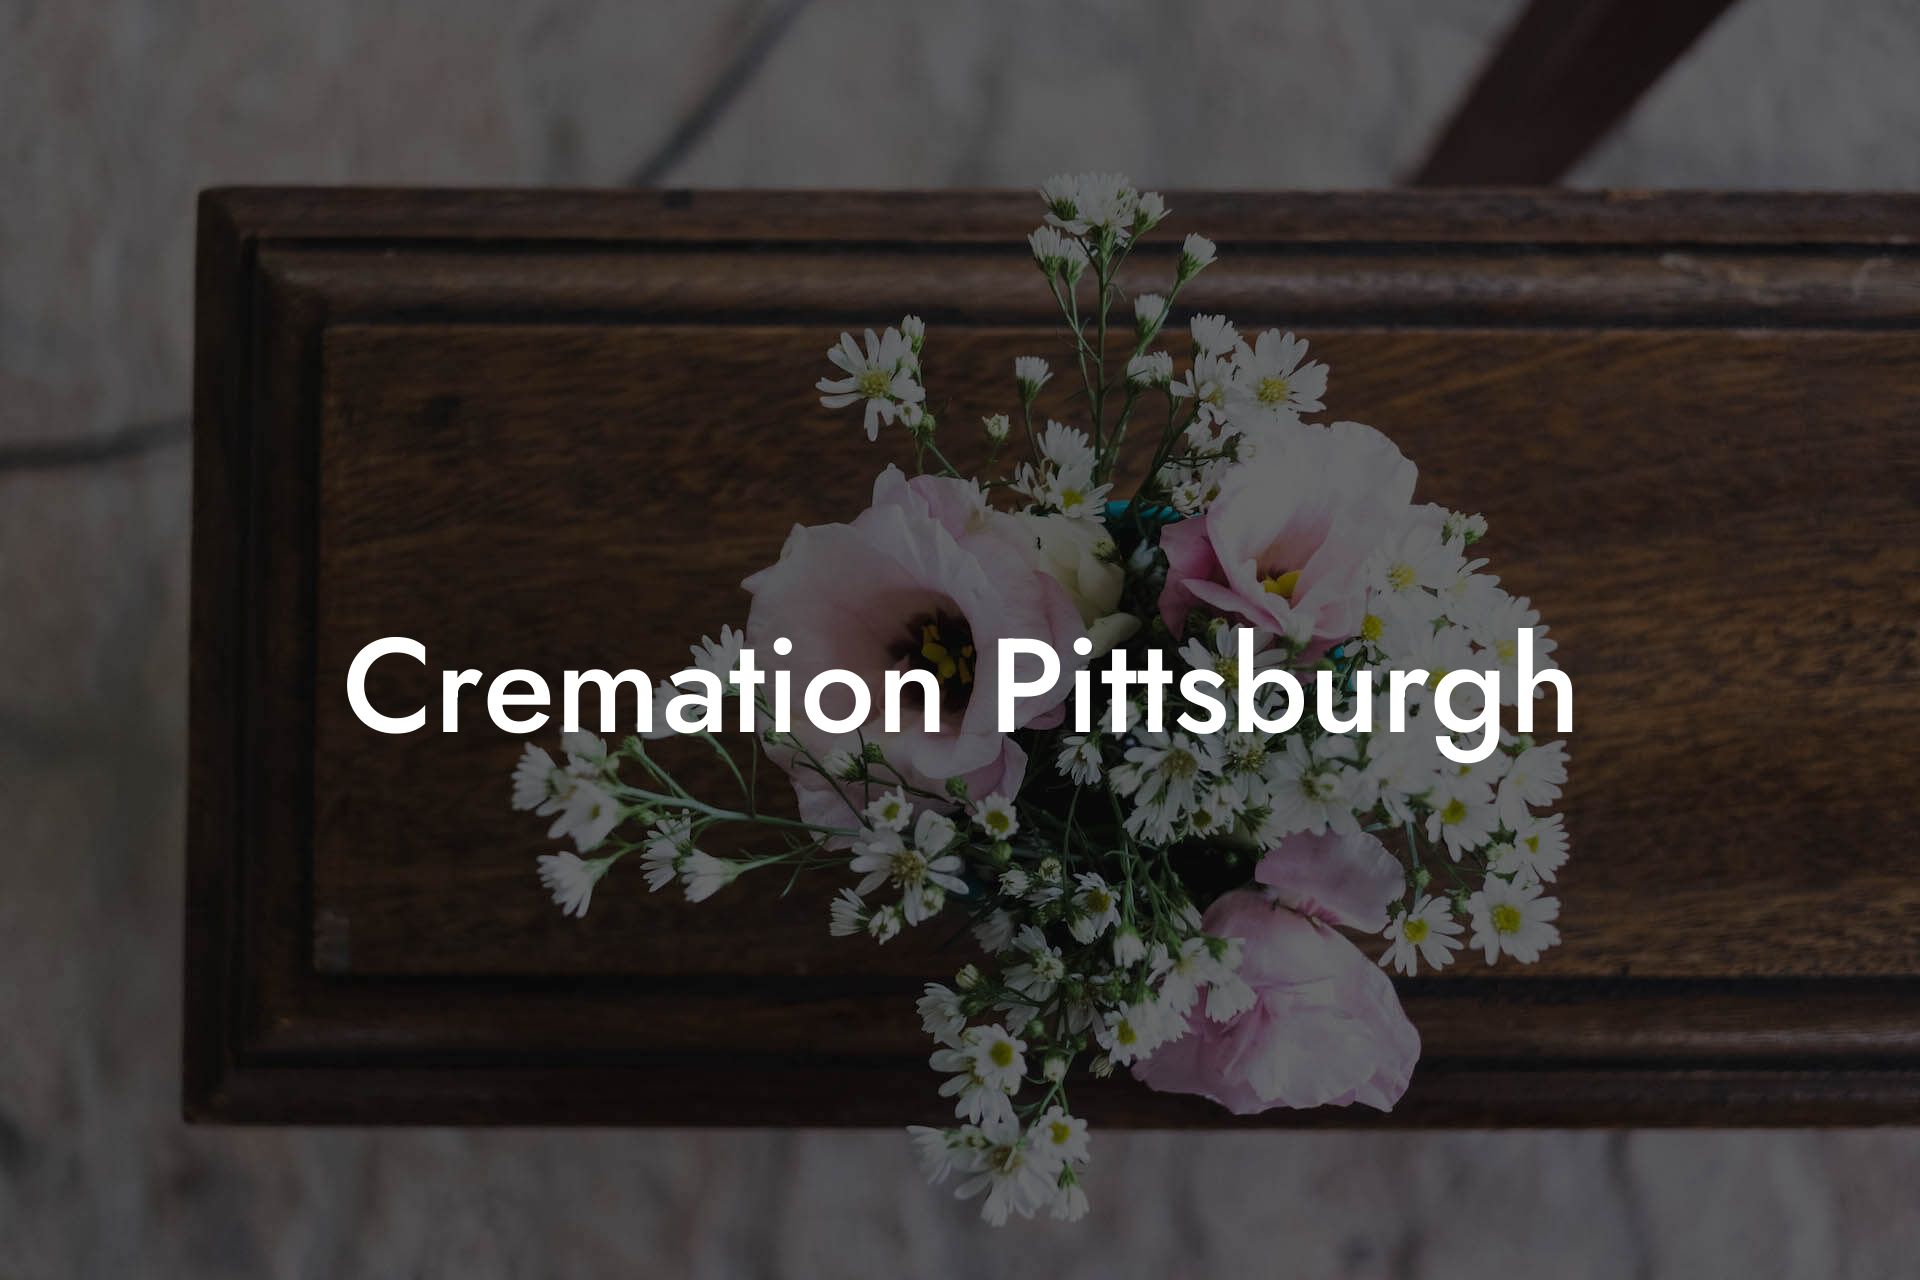 Cremation Pittsburgh